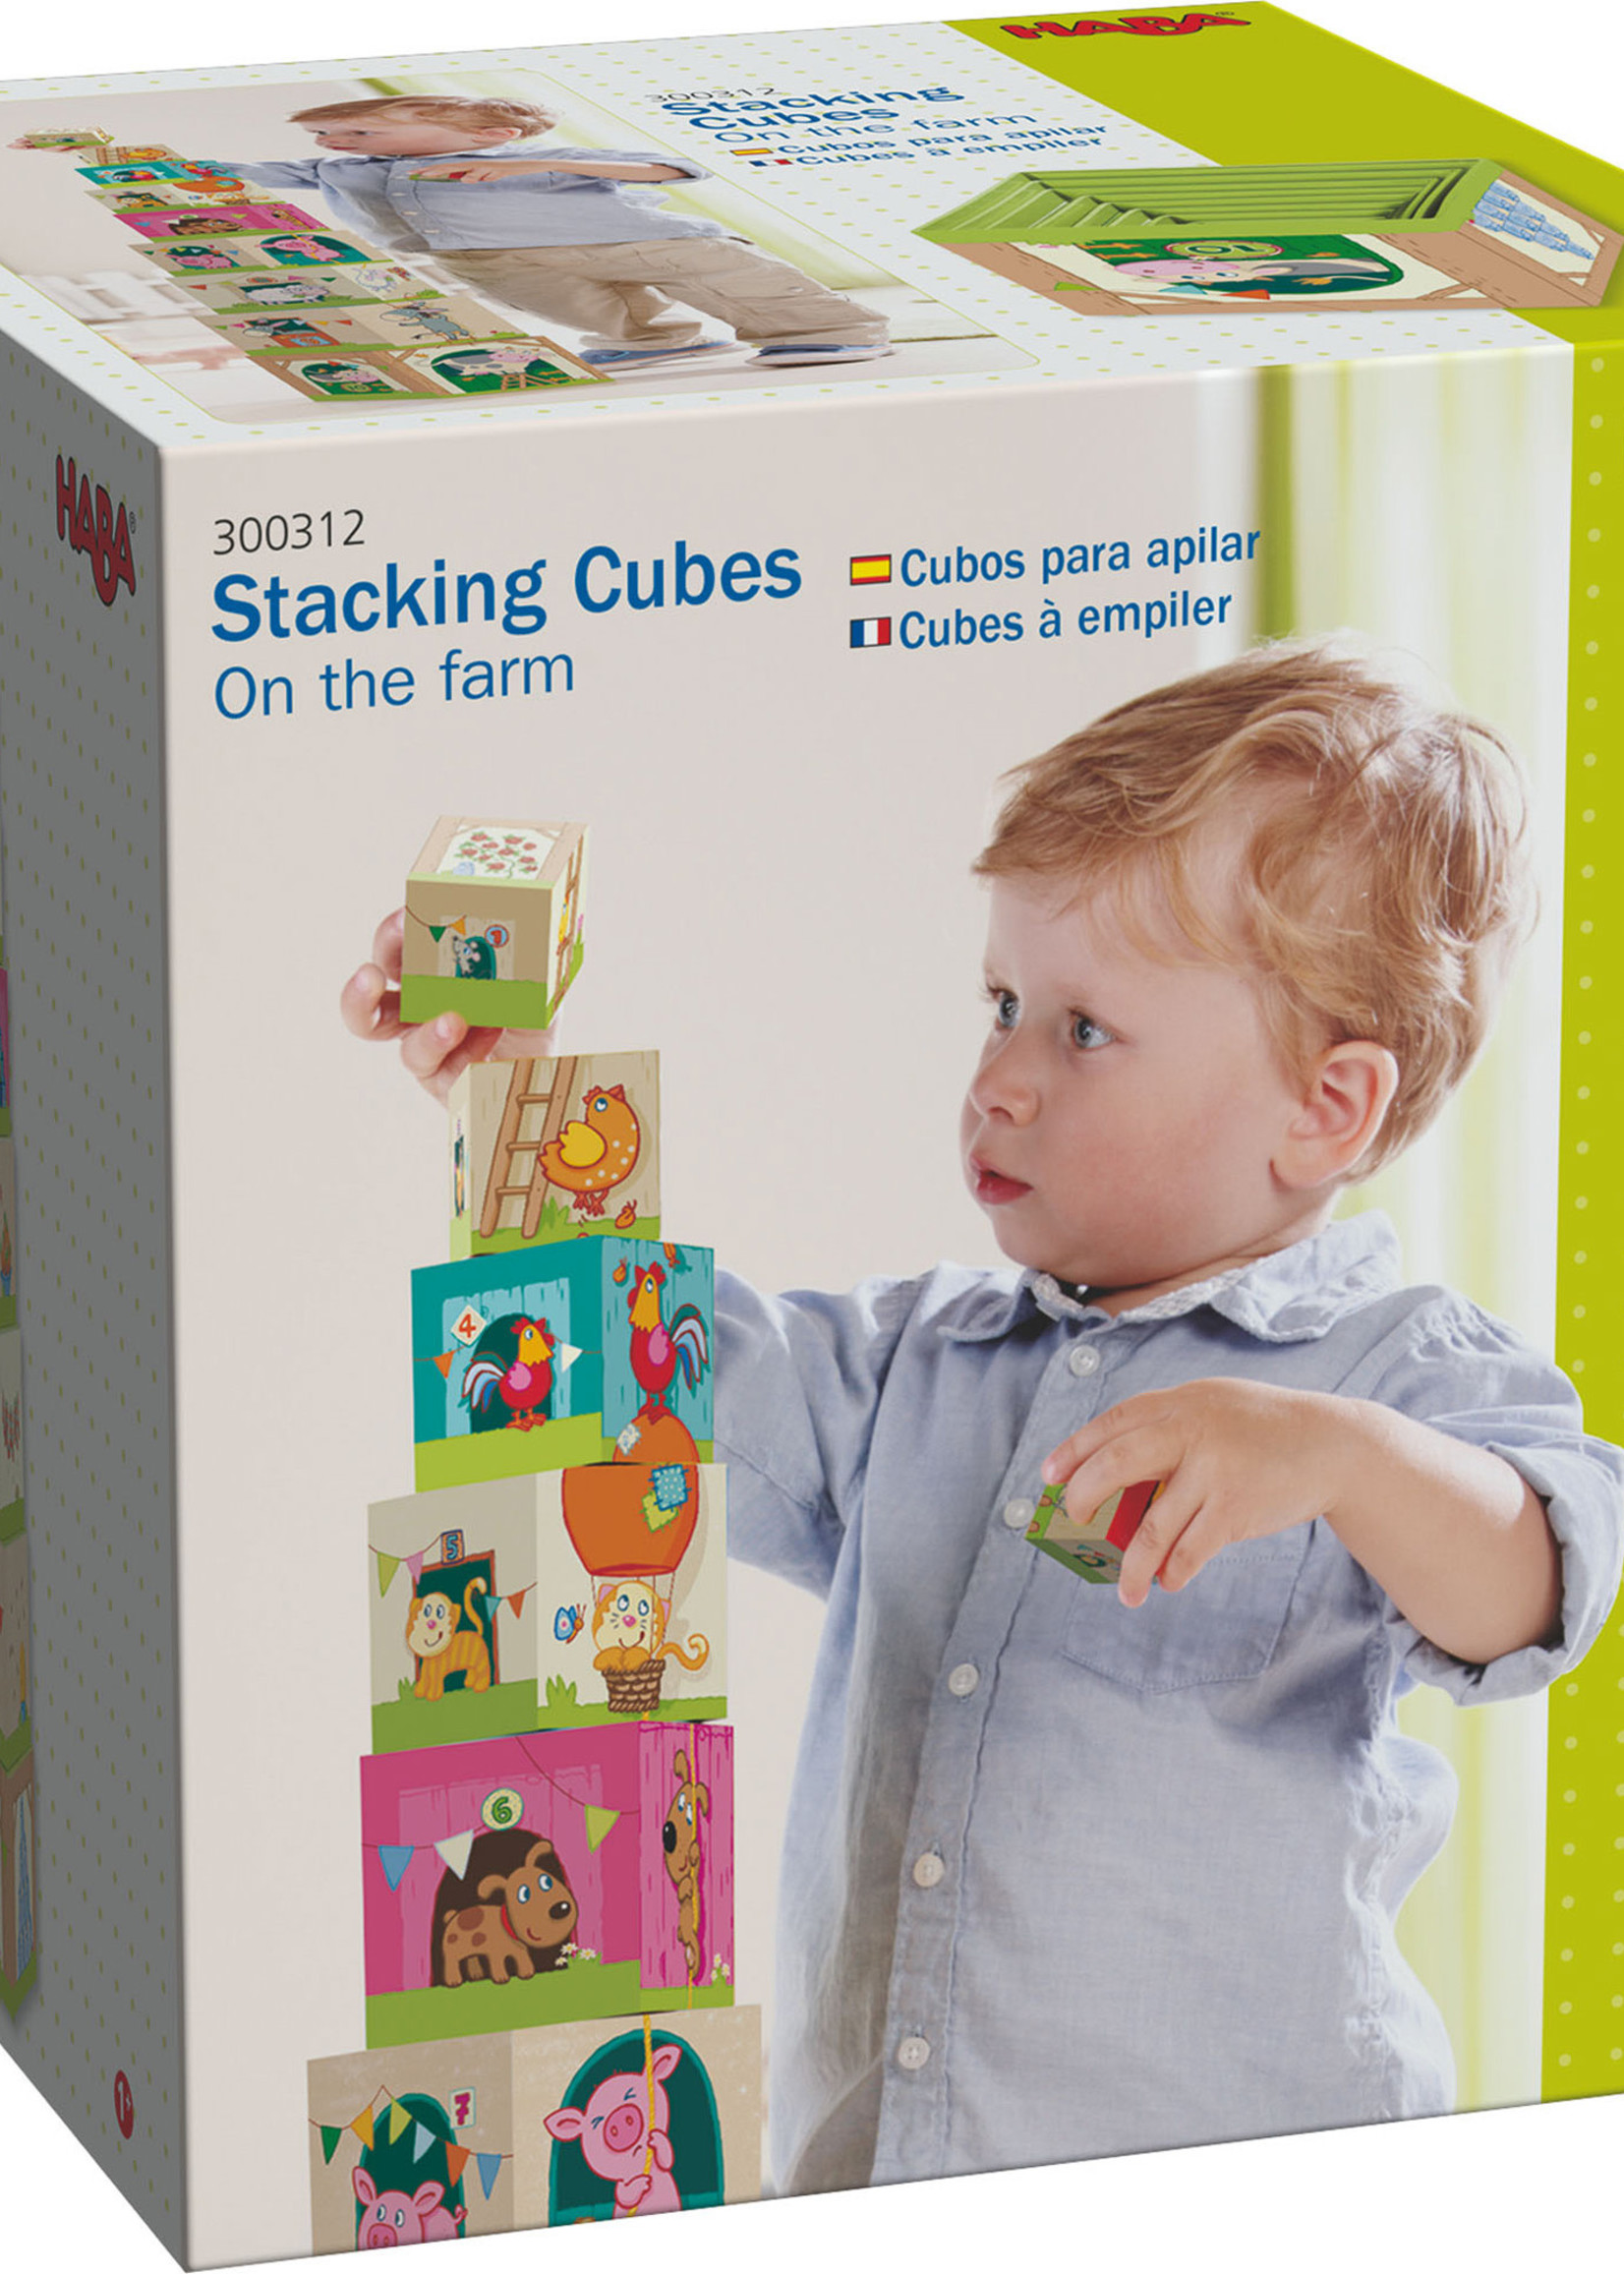 On the Farm Stacking Cubes